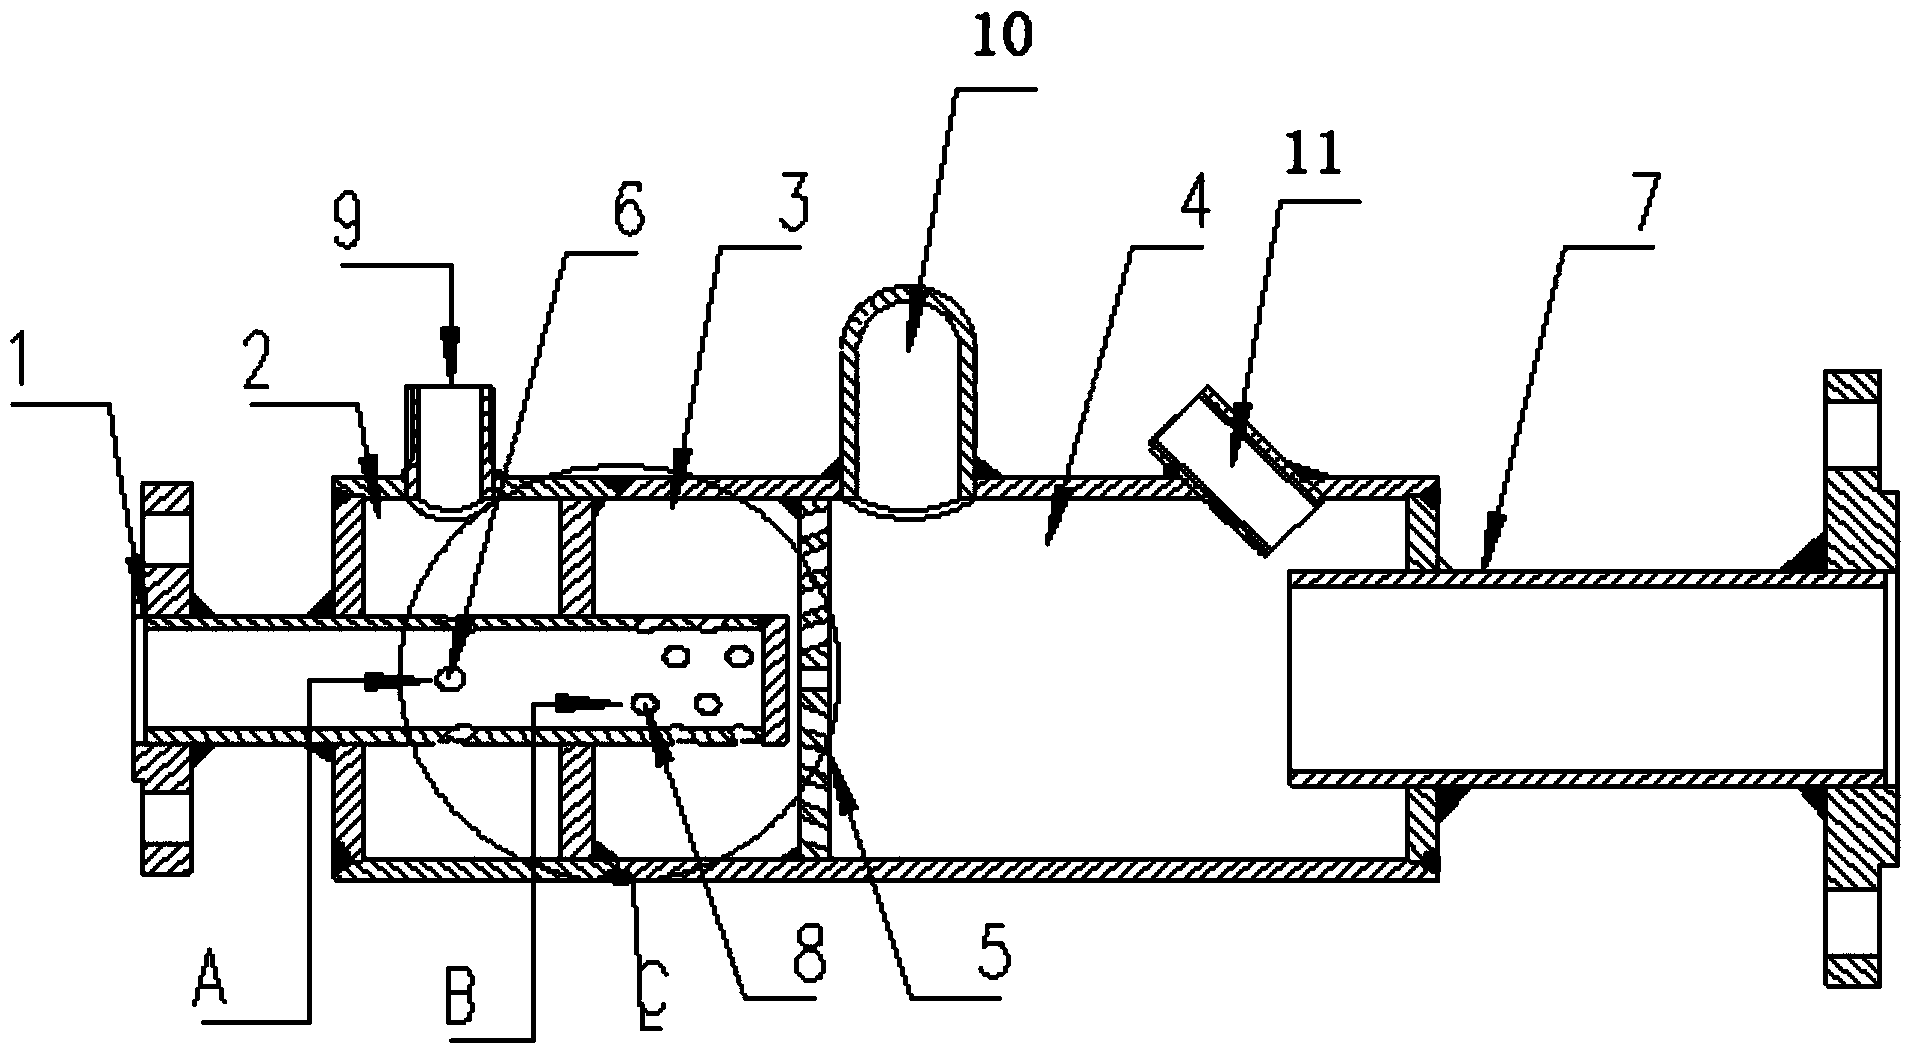 High-mixing-ratio ignition tank